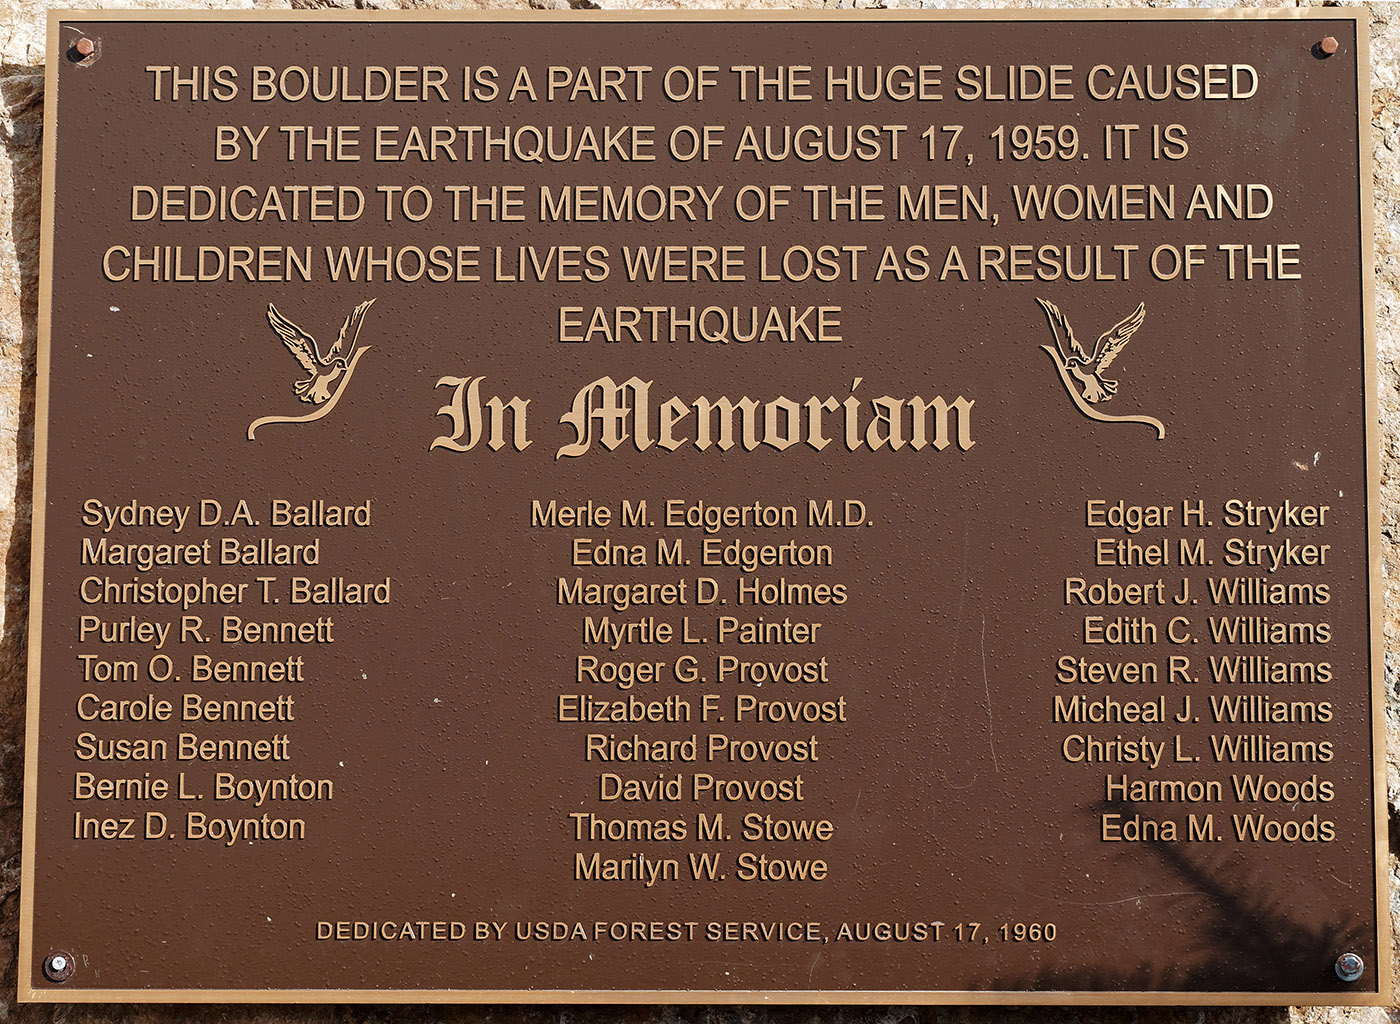 Memorial Plaque on dolomite boulder for the 29 campers and other valley residents who died in the landslide.